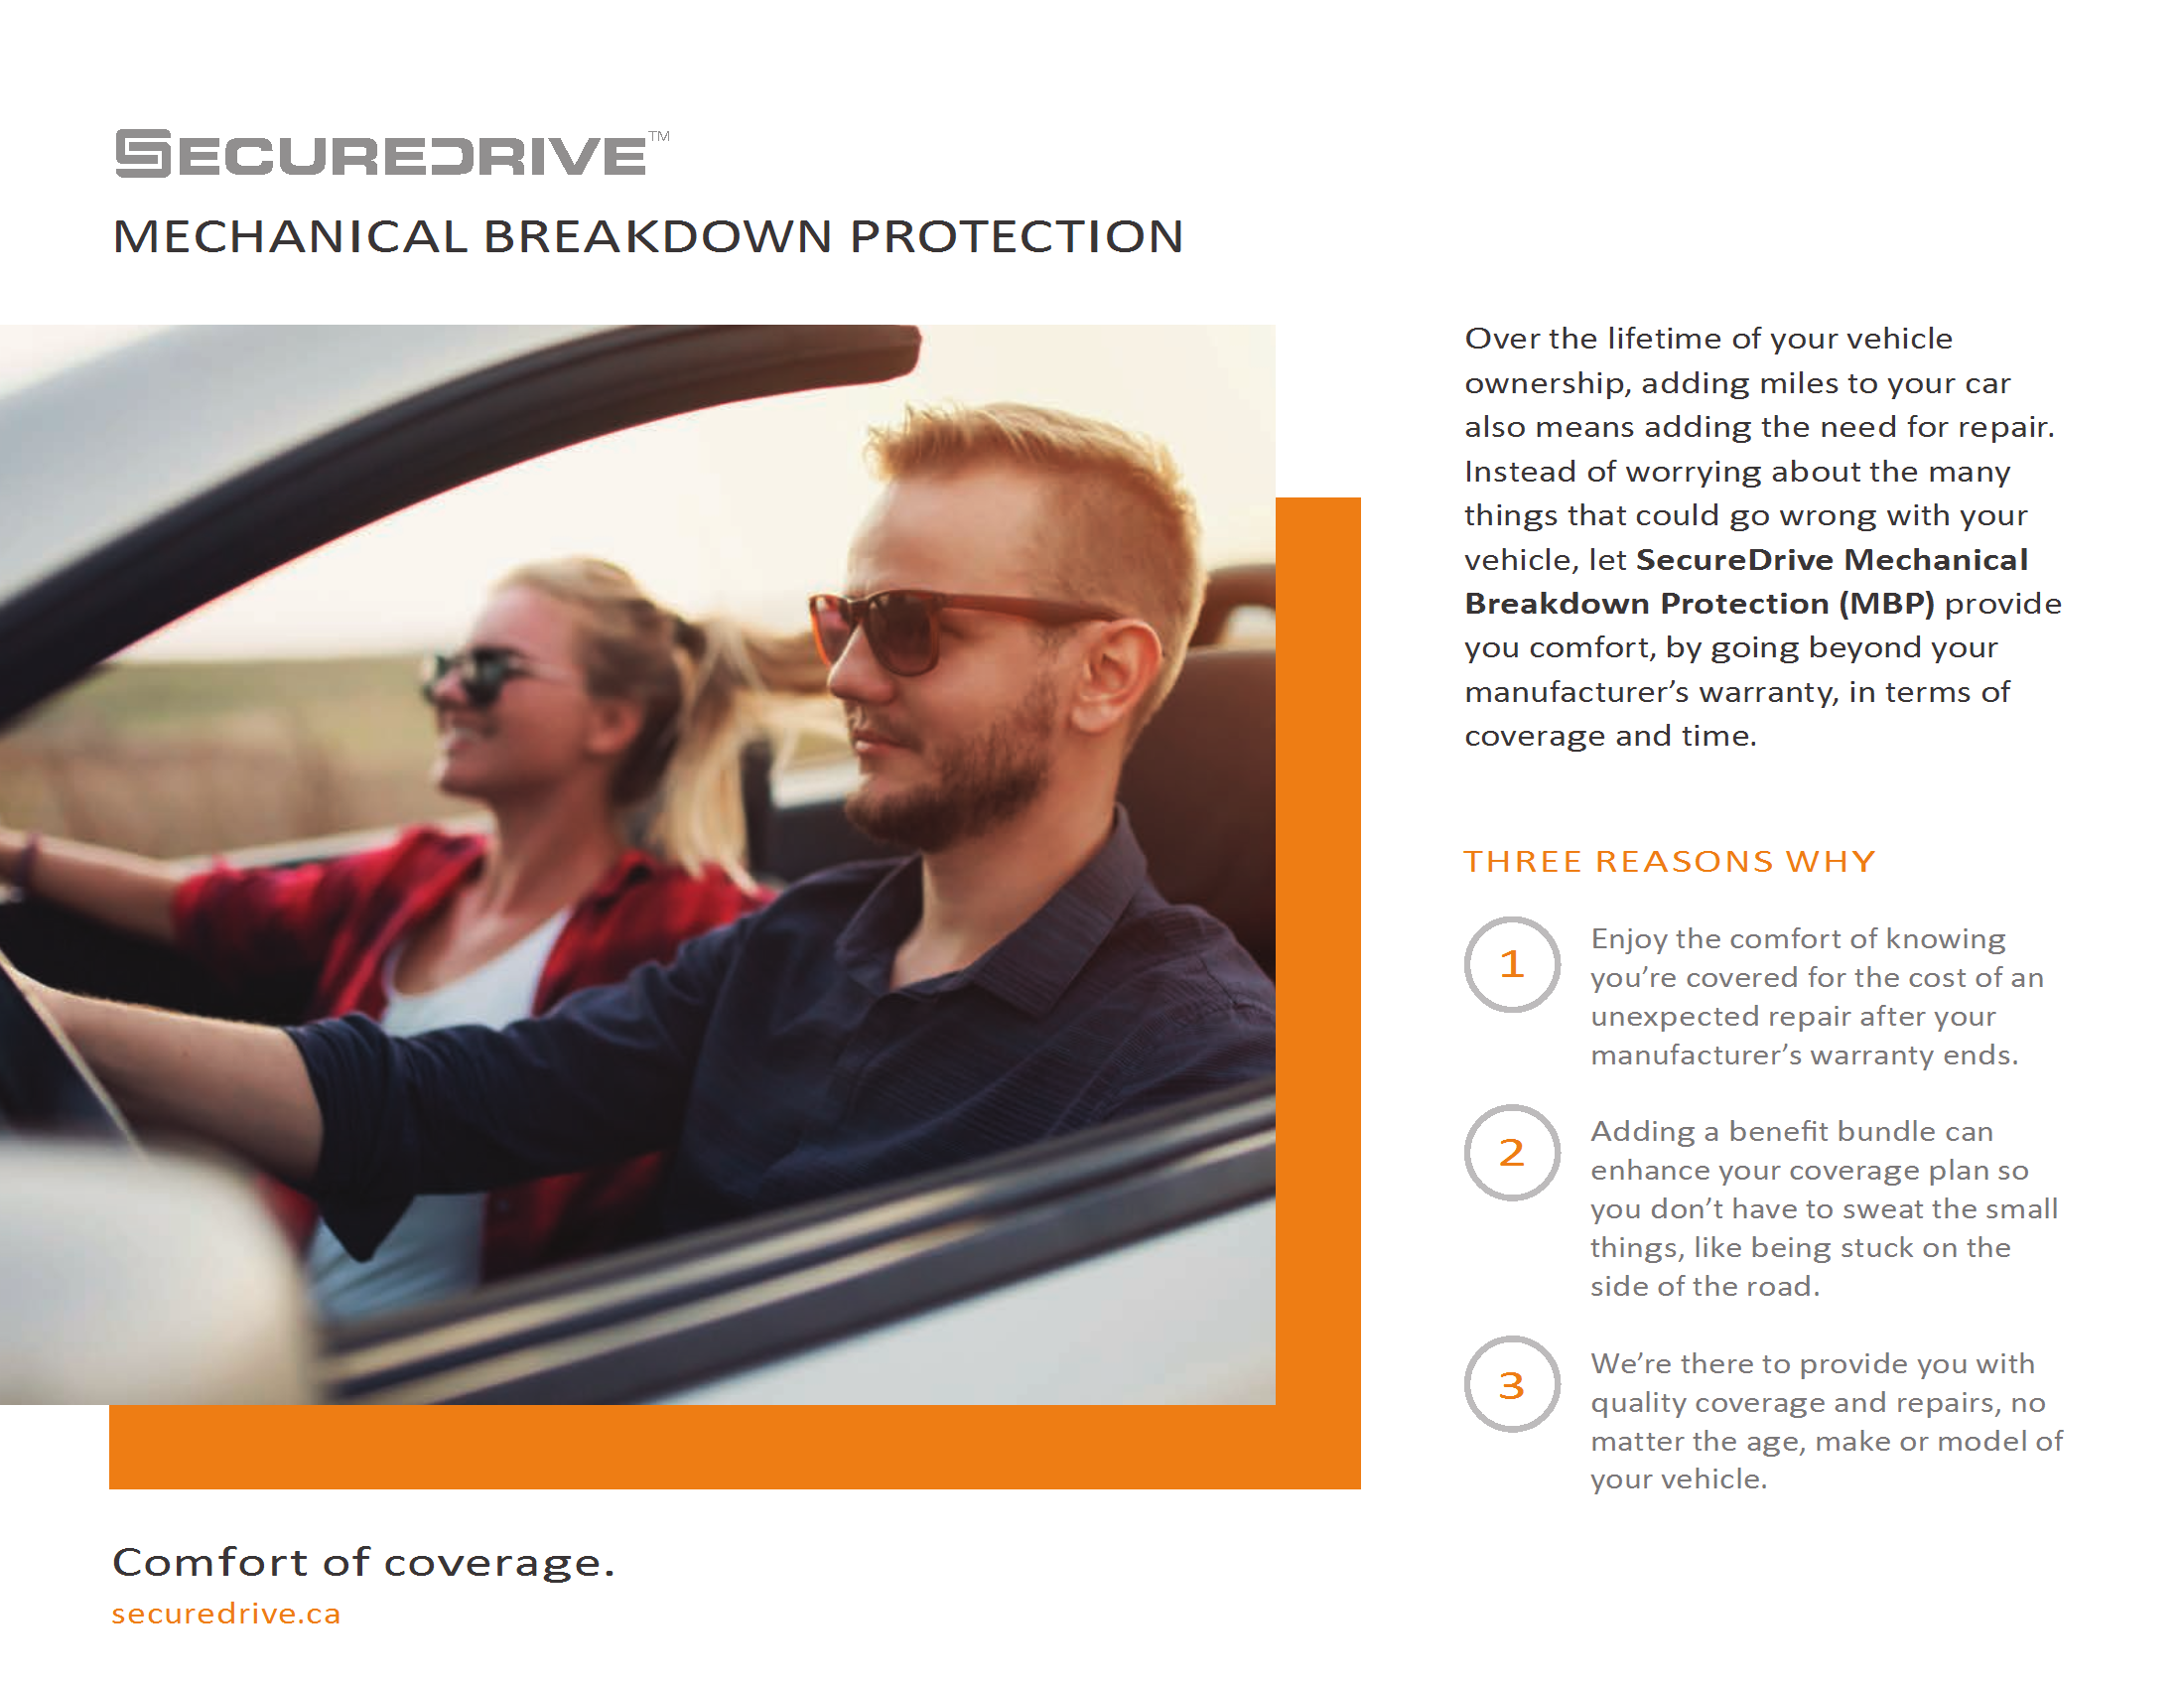 LGM SECURE DRIVE COVERAGE